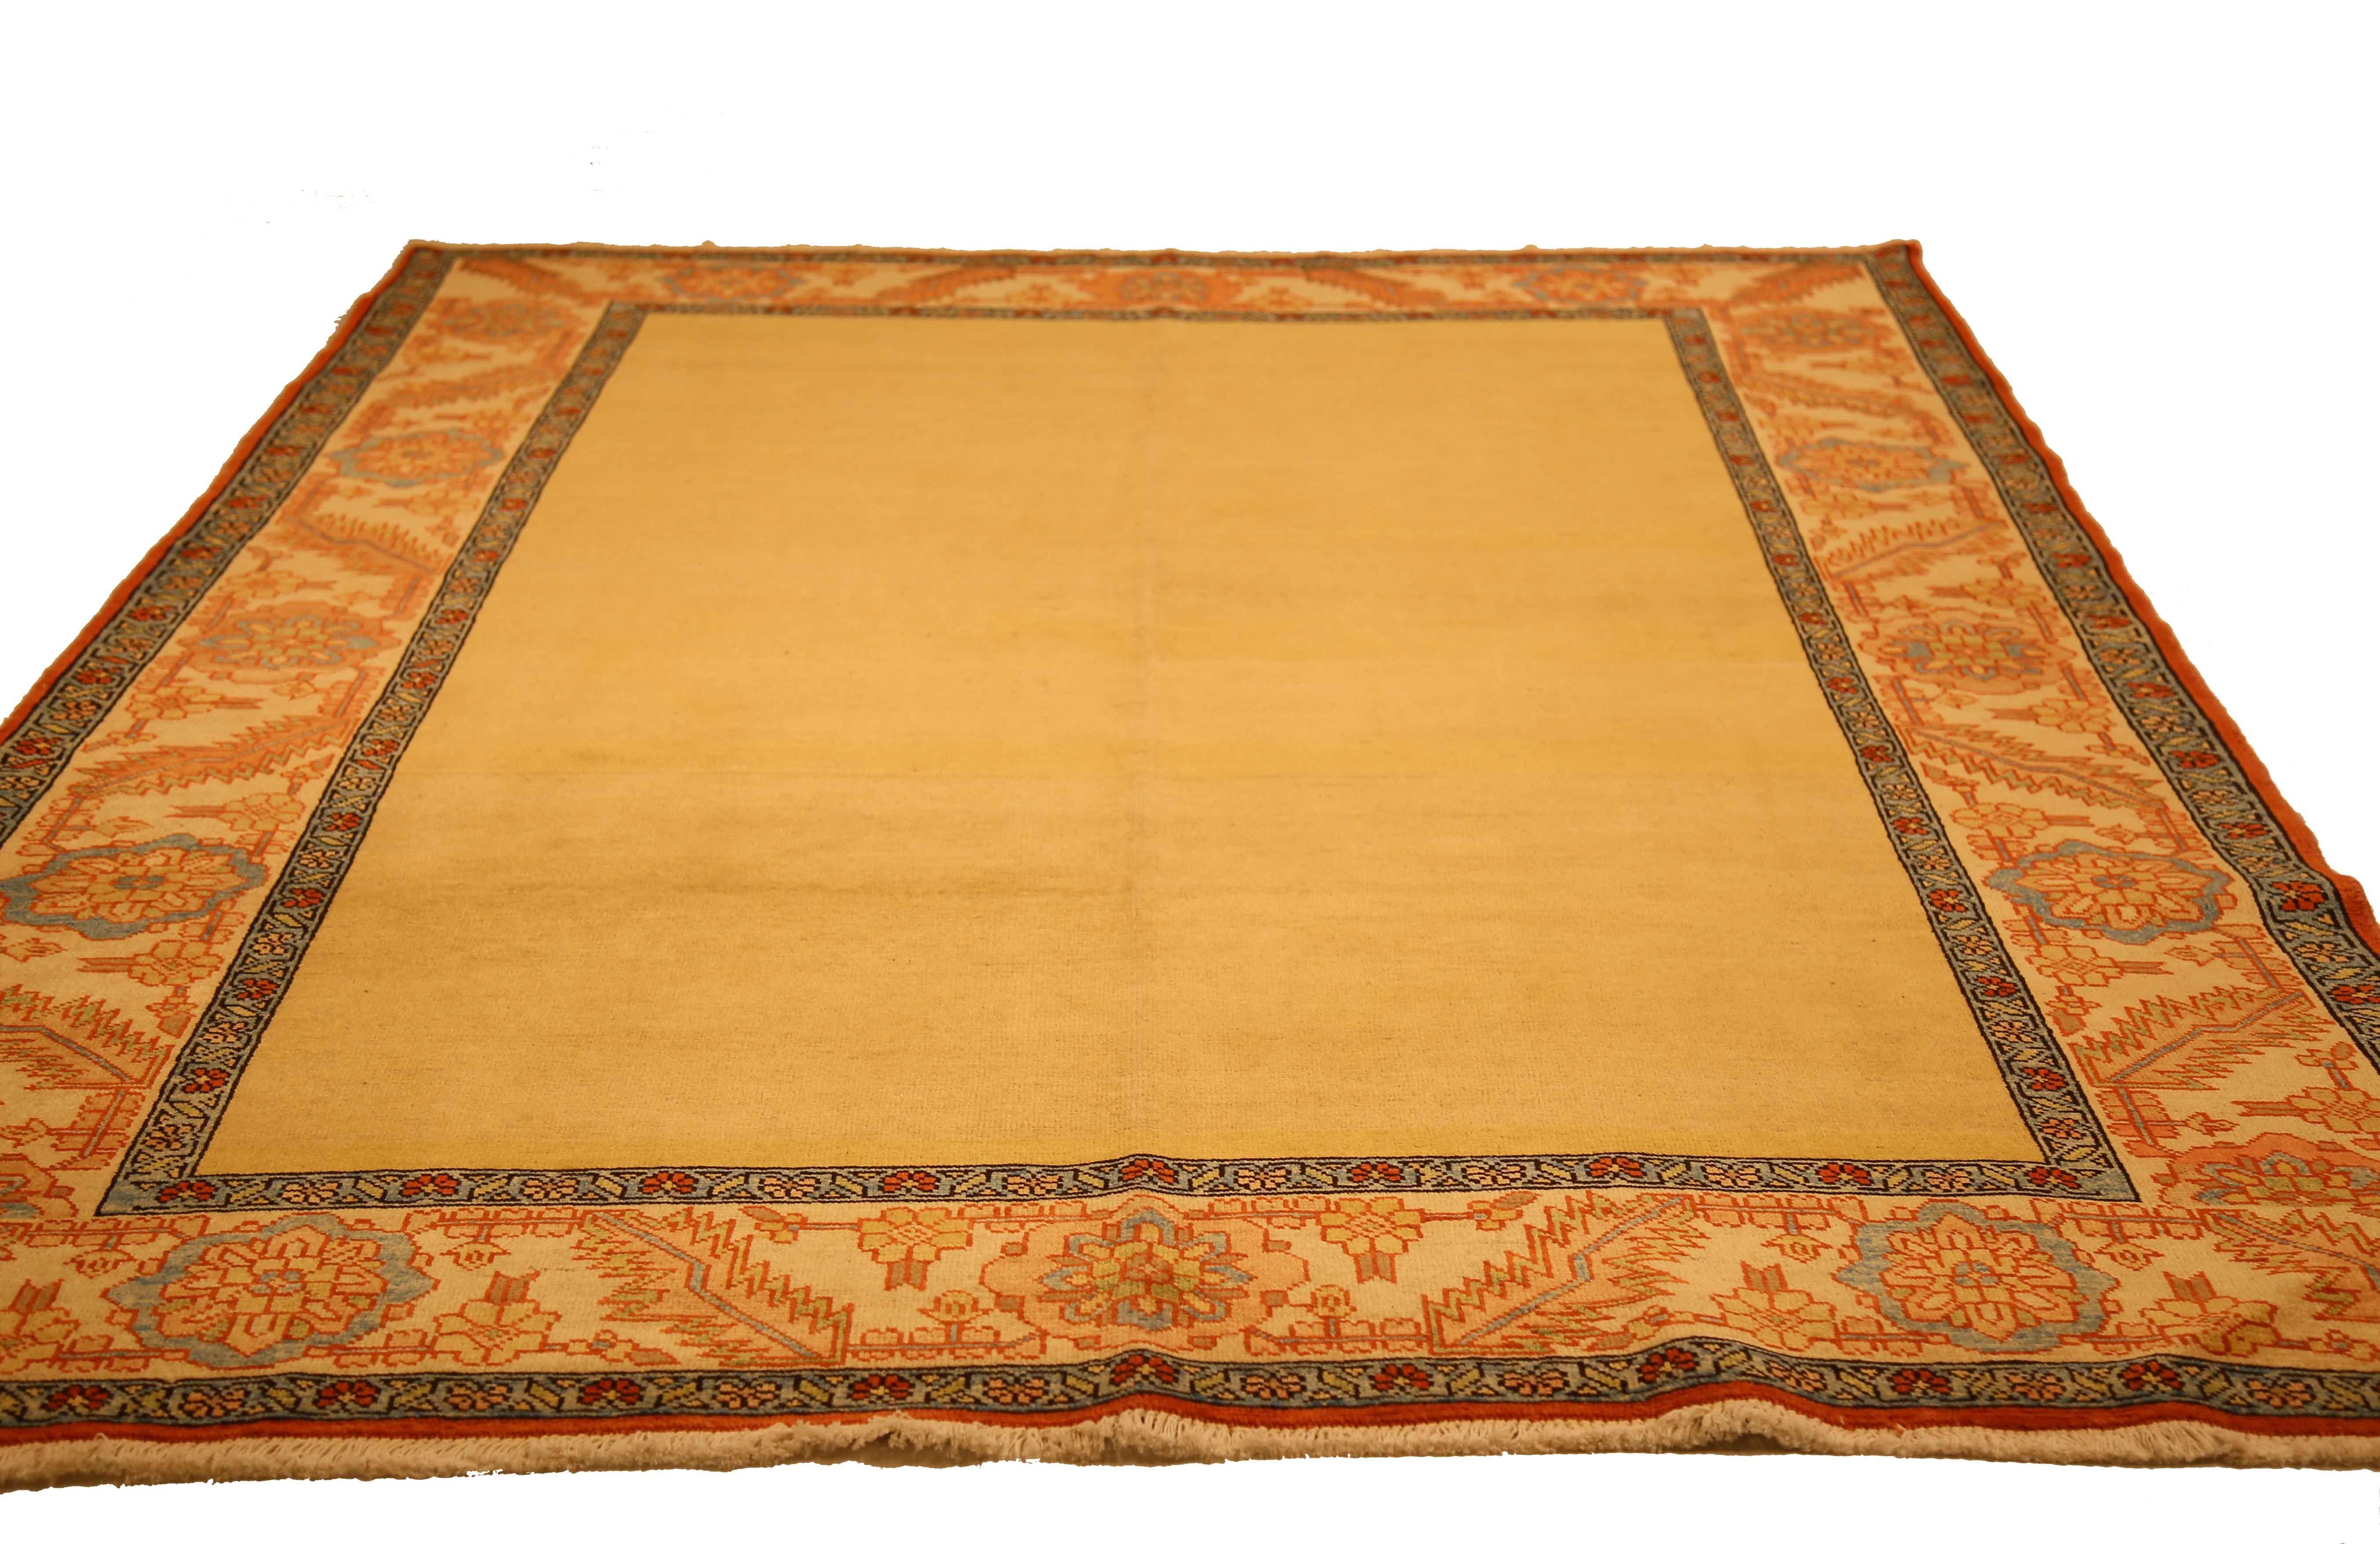 Hand-Woven Contemporary Persian Heriz Rug with an Open Yellow Center Field & Floral Borders For Sale